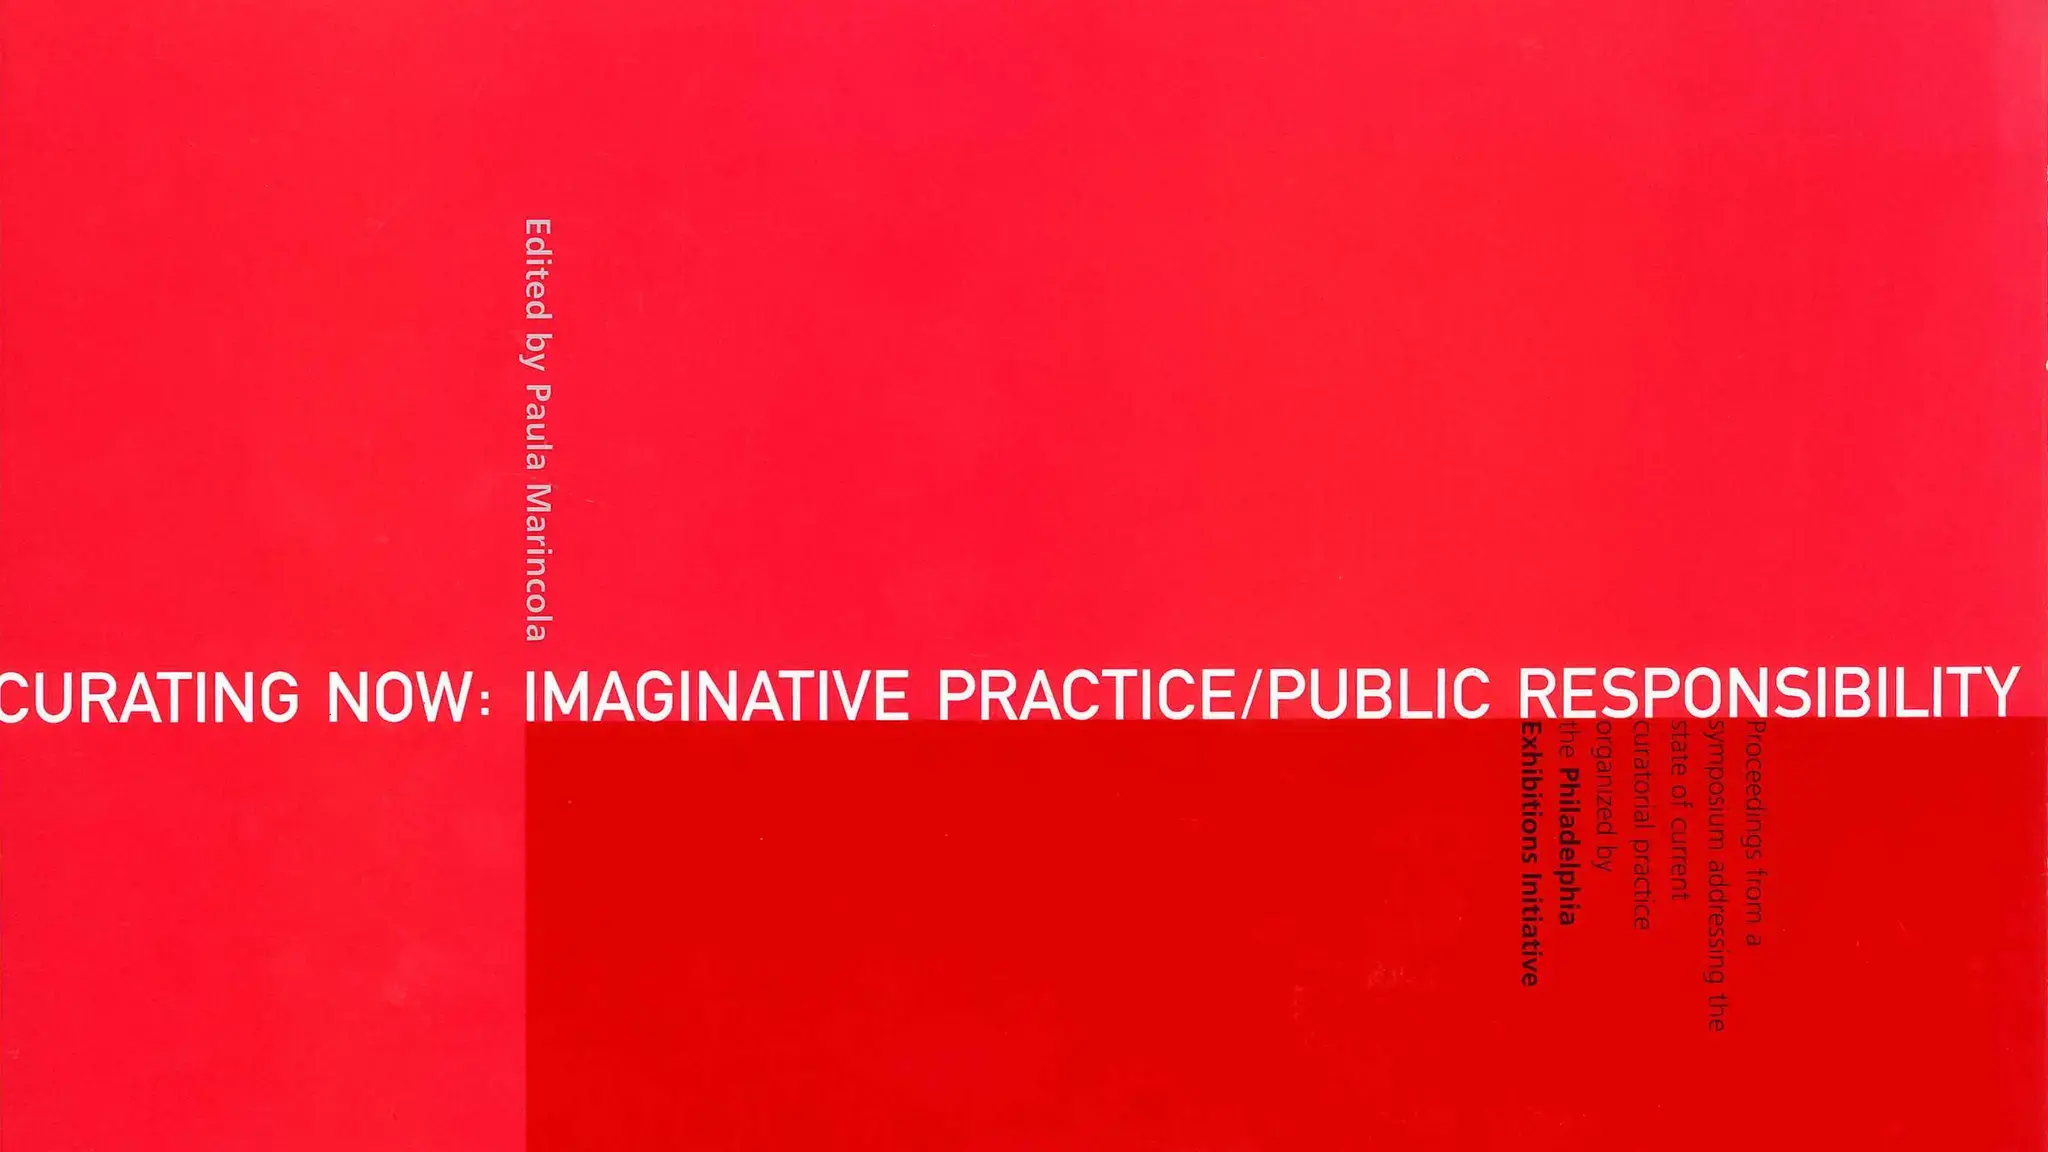 Cover of Curating Now: Imaginative Practice/Public Responsibility, published by The Pew Center for Arts &amp; Heritage in 2001.